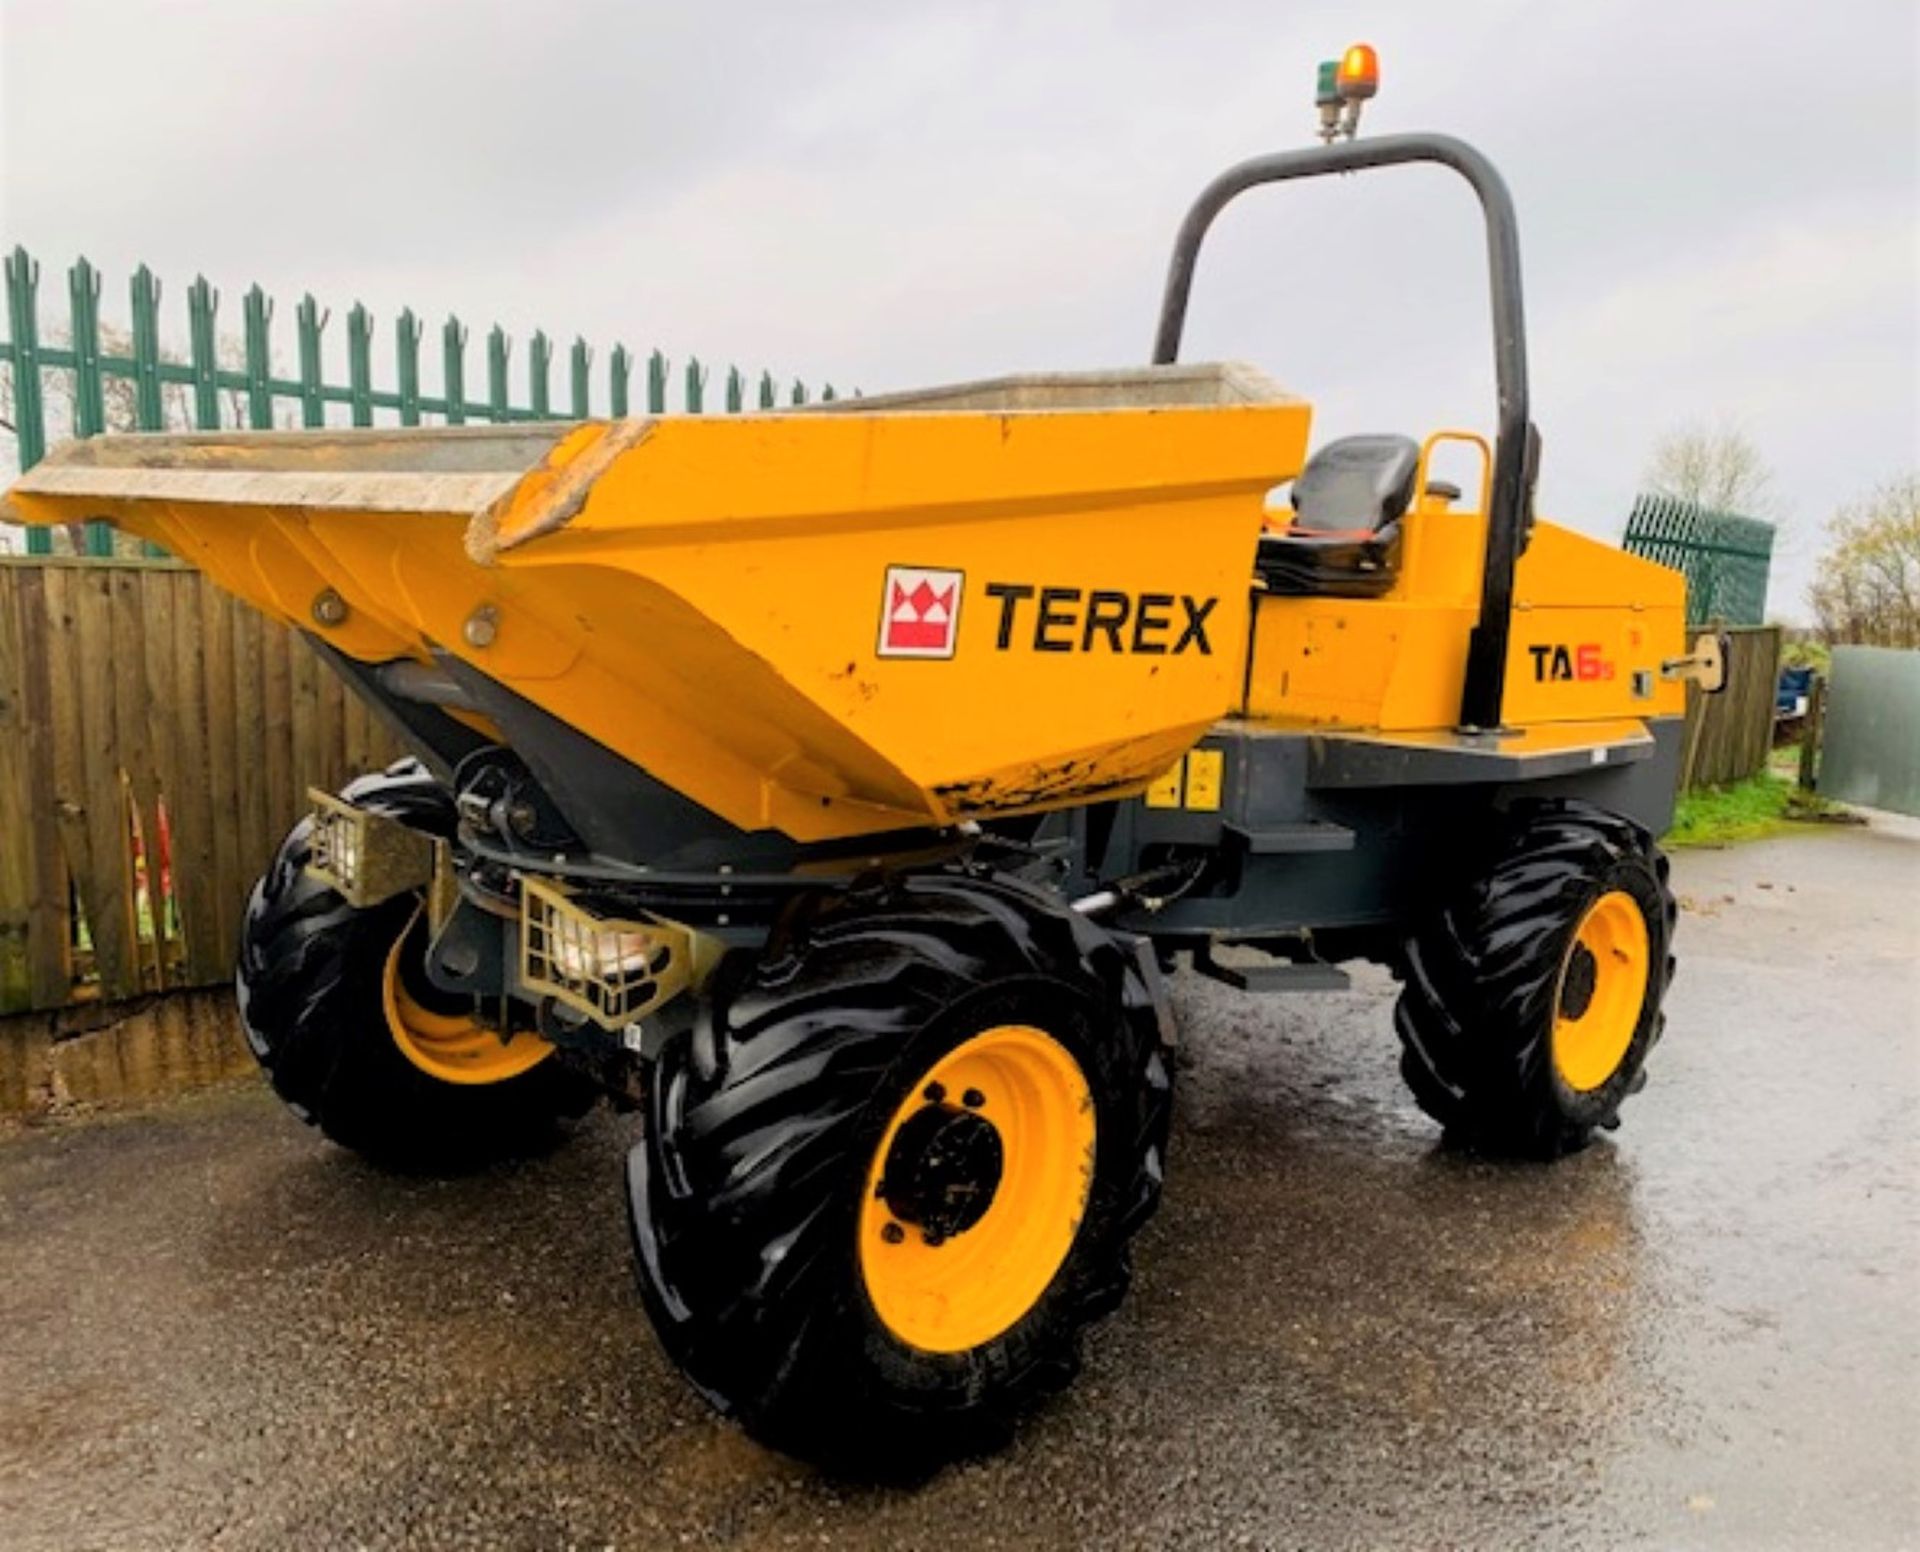 TEREX TA6 S SWIVEL DUMPER, YEAR 2017, 680 HOURS, GOOD TYRES, ORANGE AND GREEN BEACONS, CE MARKED - Image 4 of 12